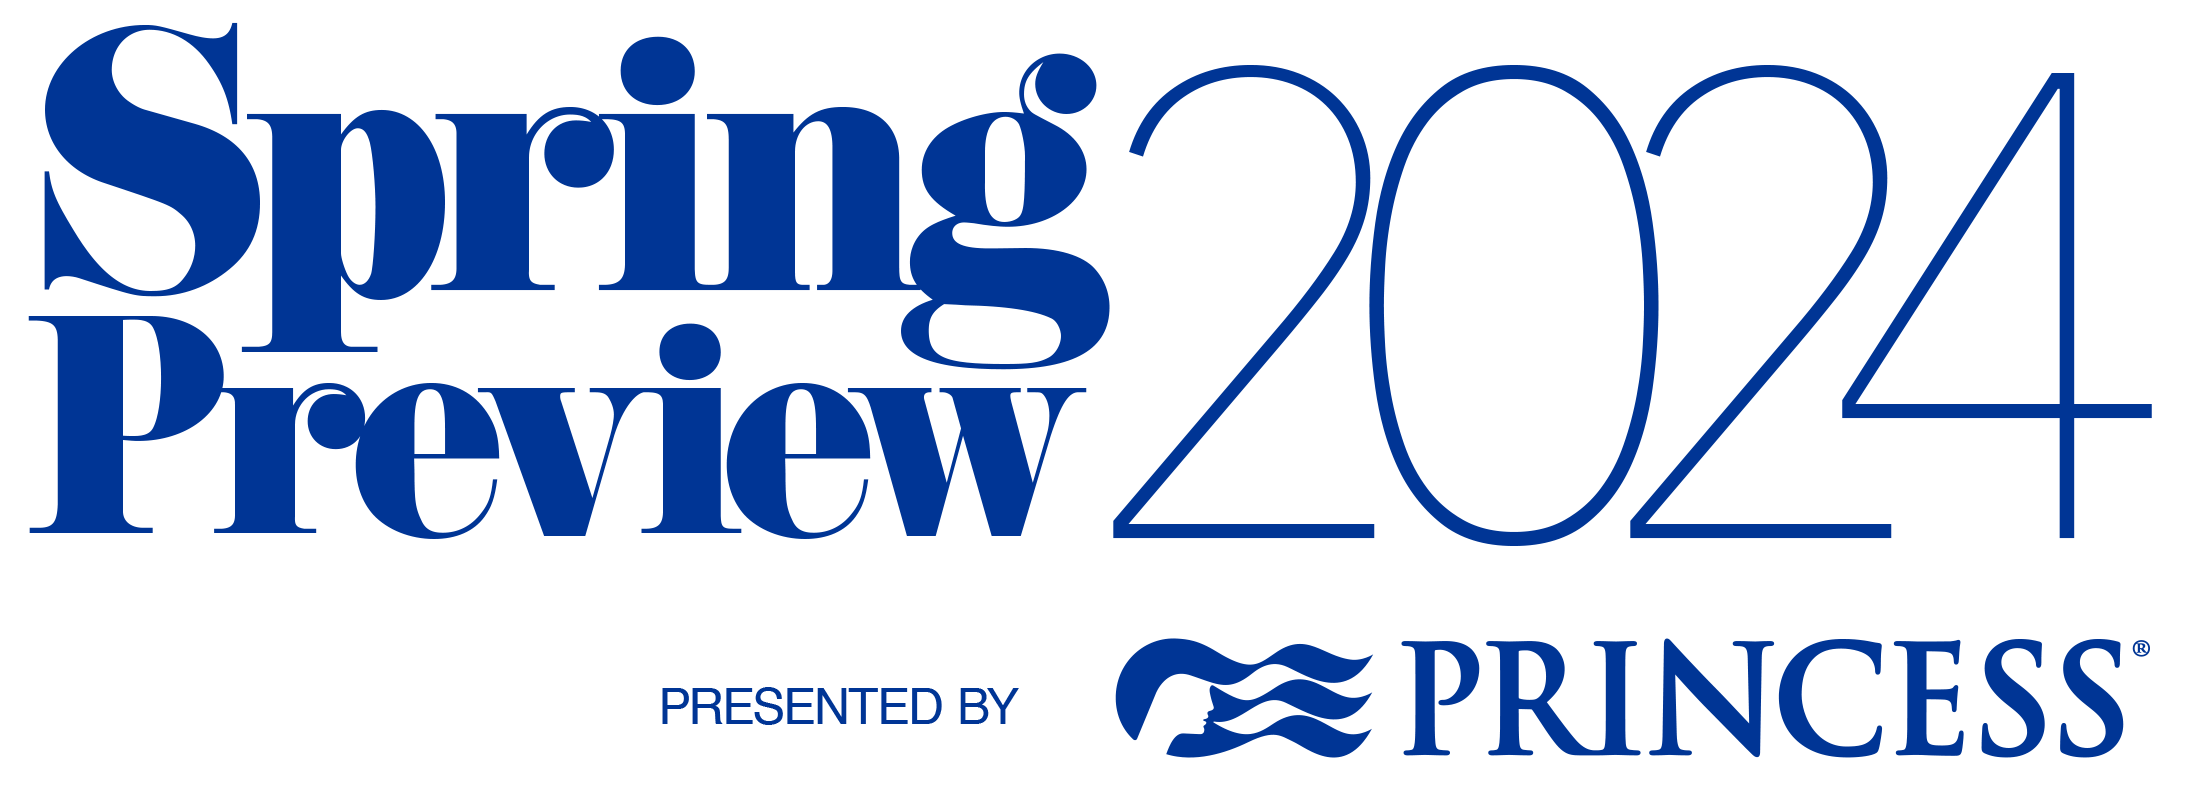 Spring Preview 2024 Presented by Princess Cruises